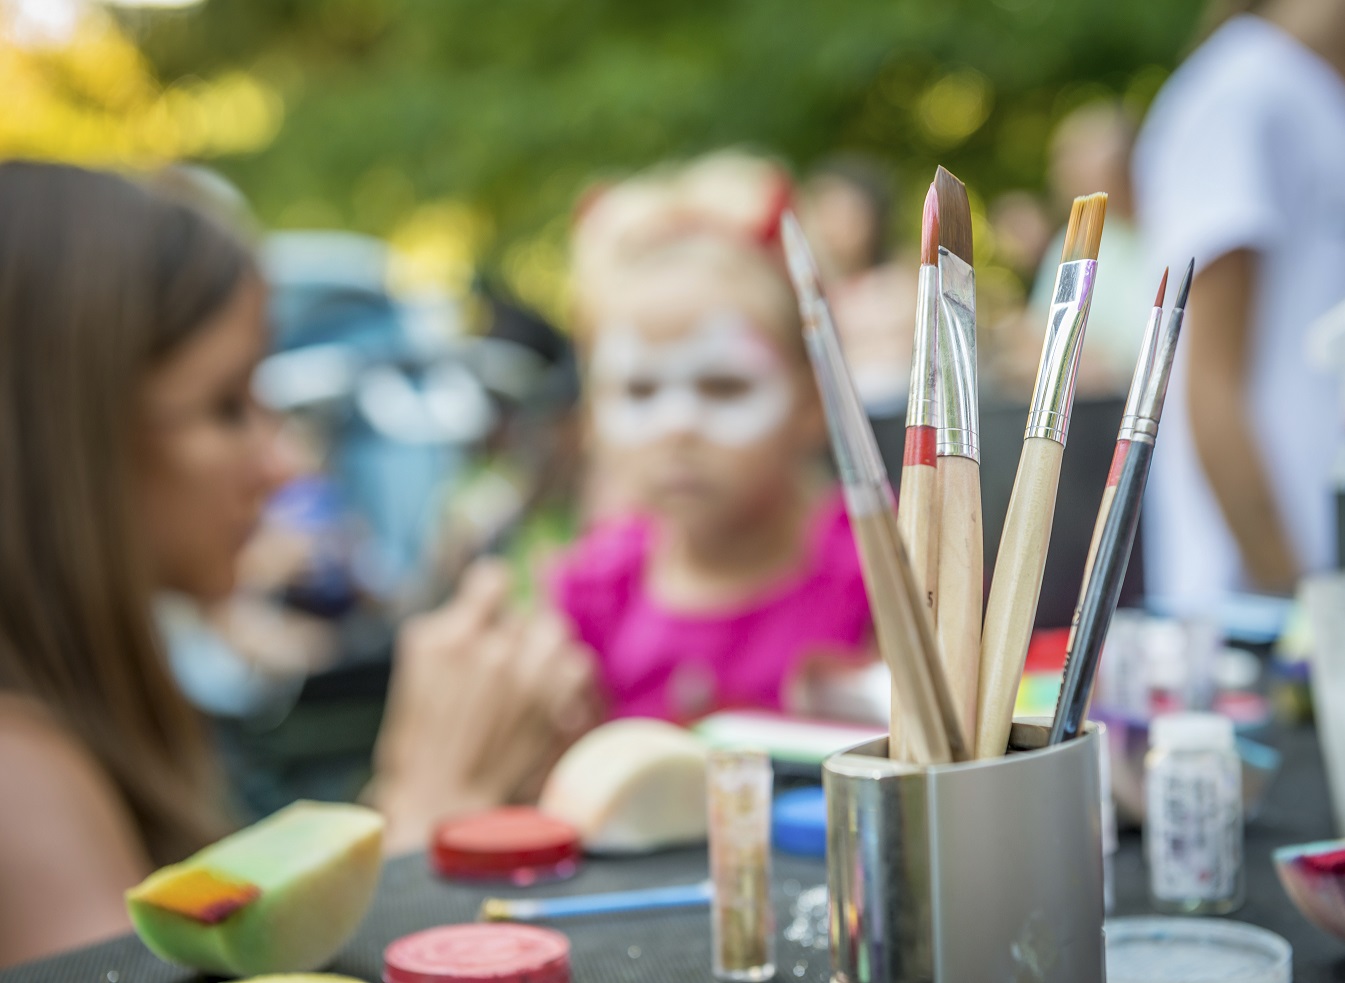 Face painting at an outdoor event.